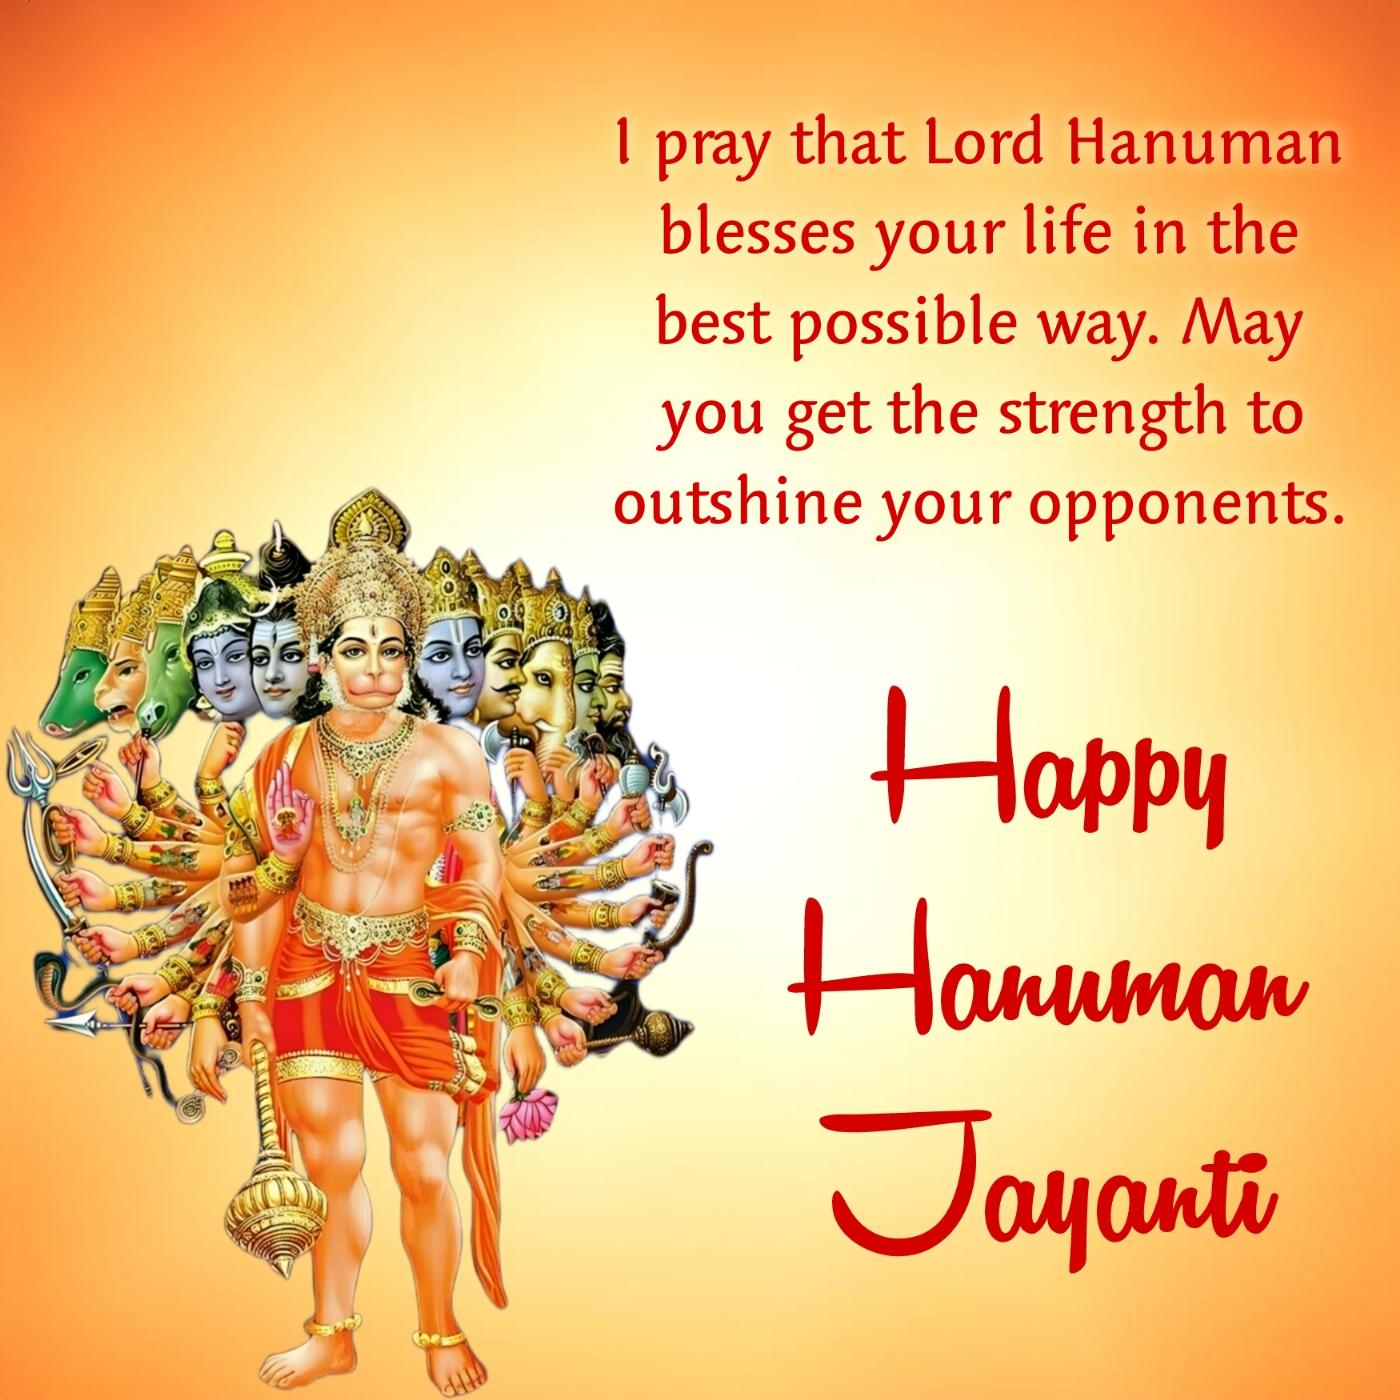 I pray that Lord Hanuman blesses your life in the best possible way